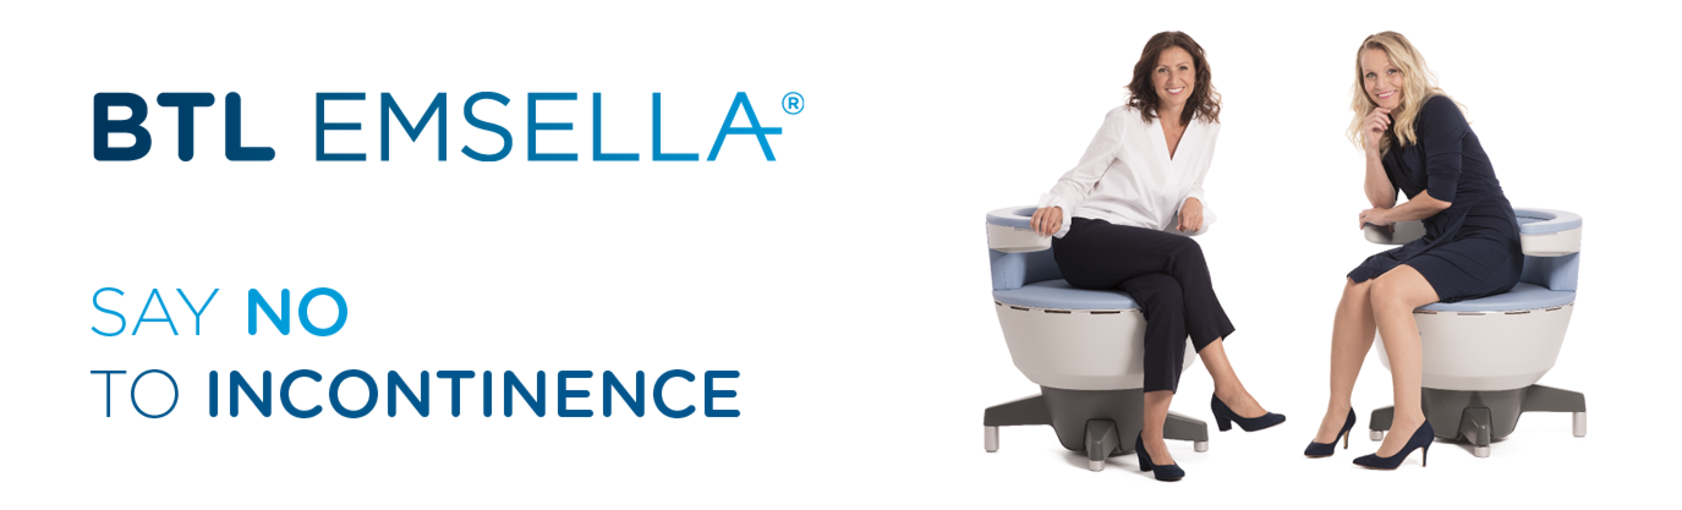 EMSELLA for incontinence treatments & bladder leakages